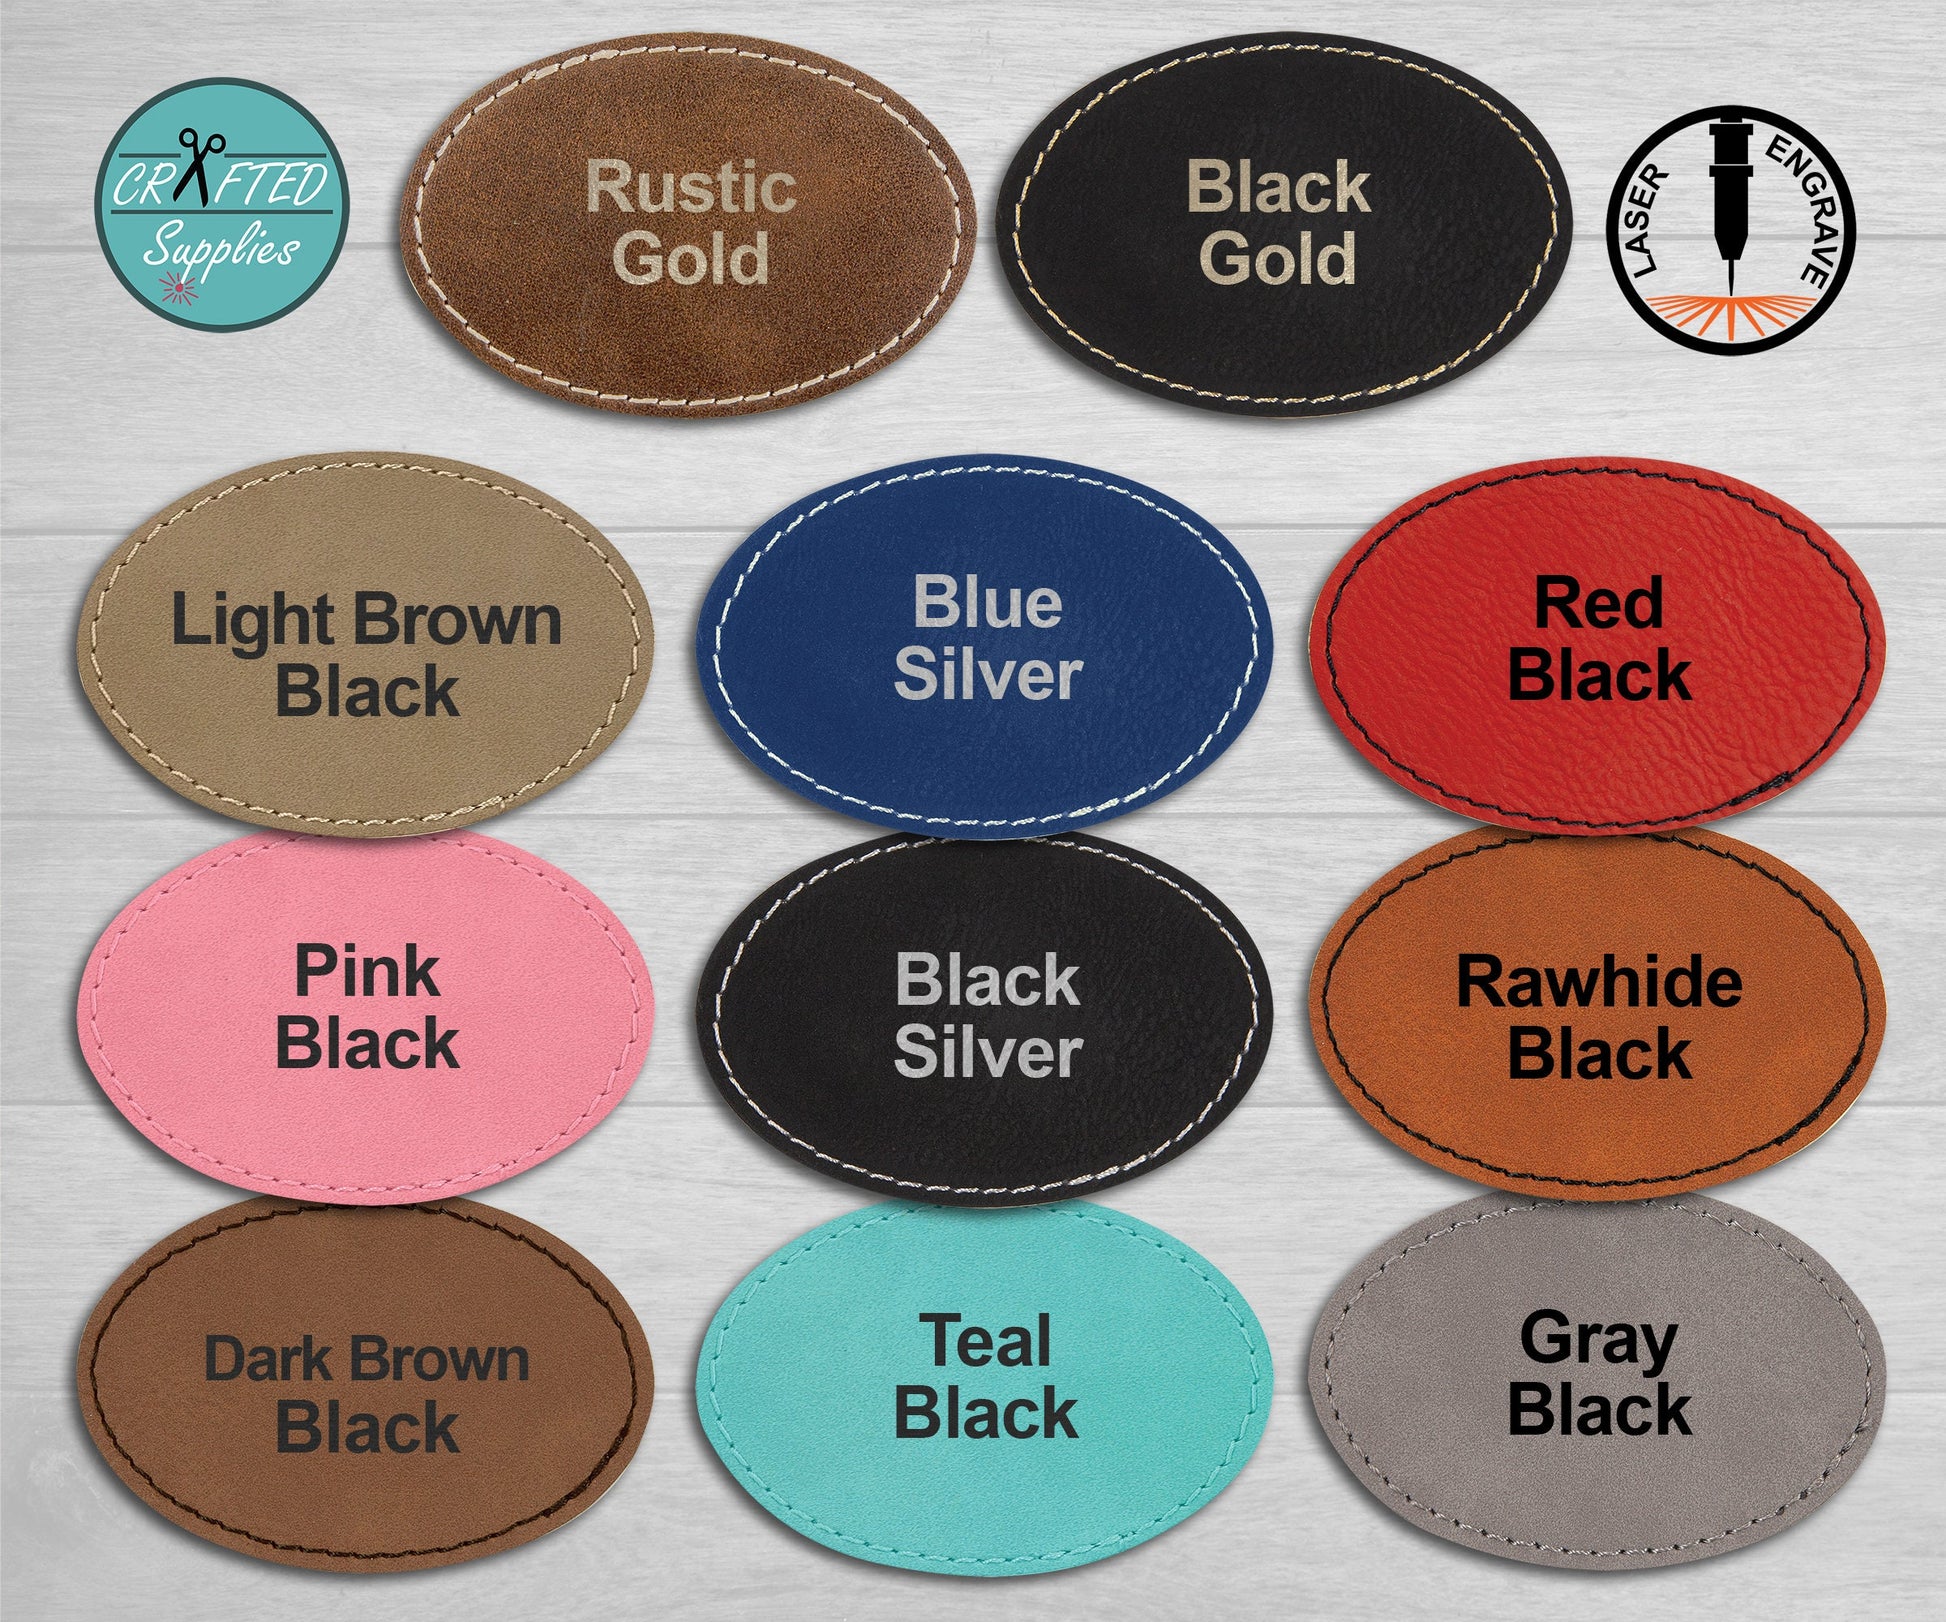 Oval Leatherette Patches